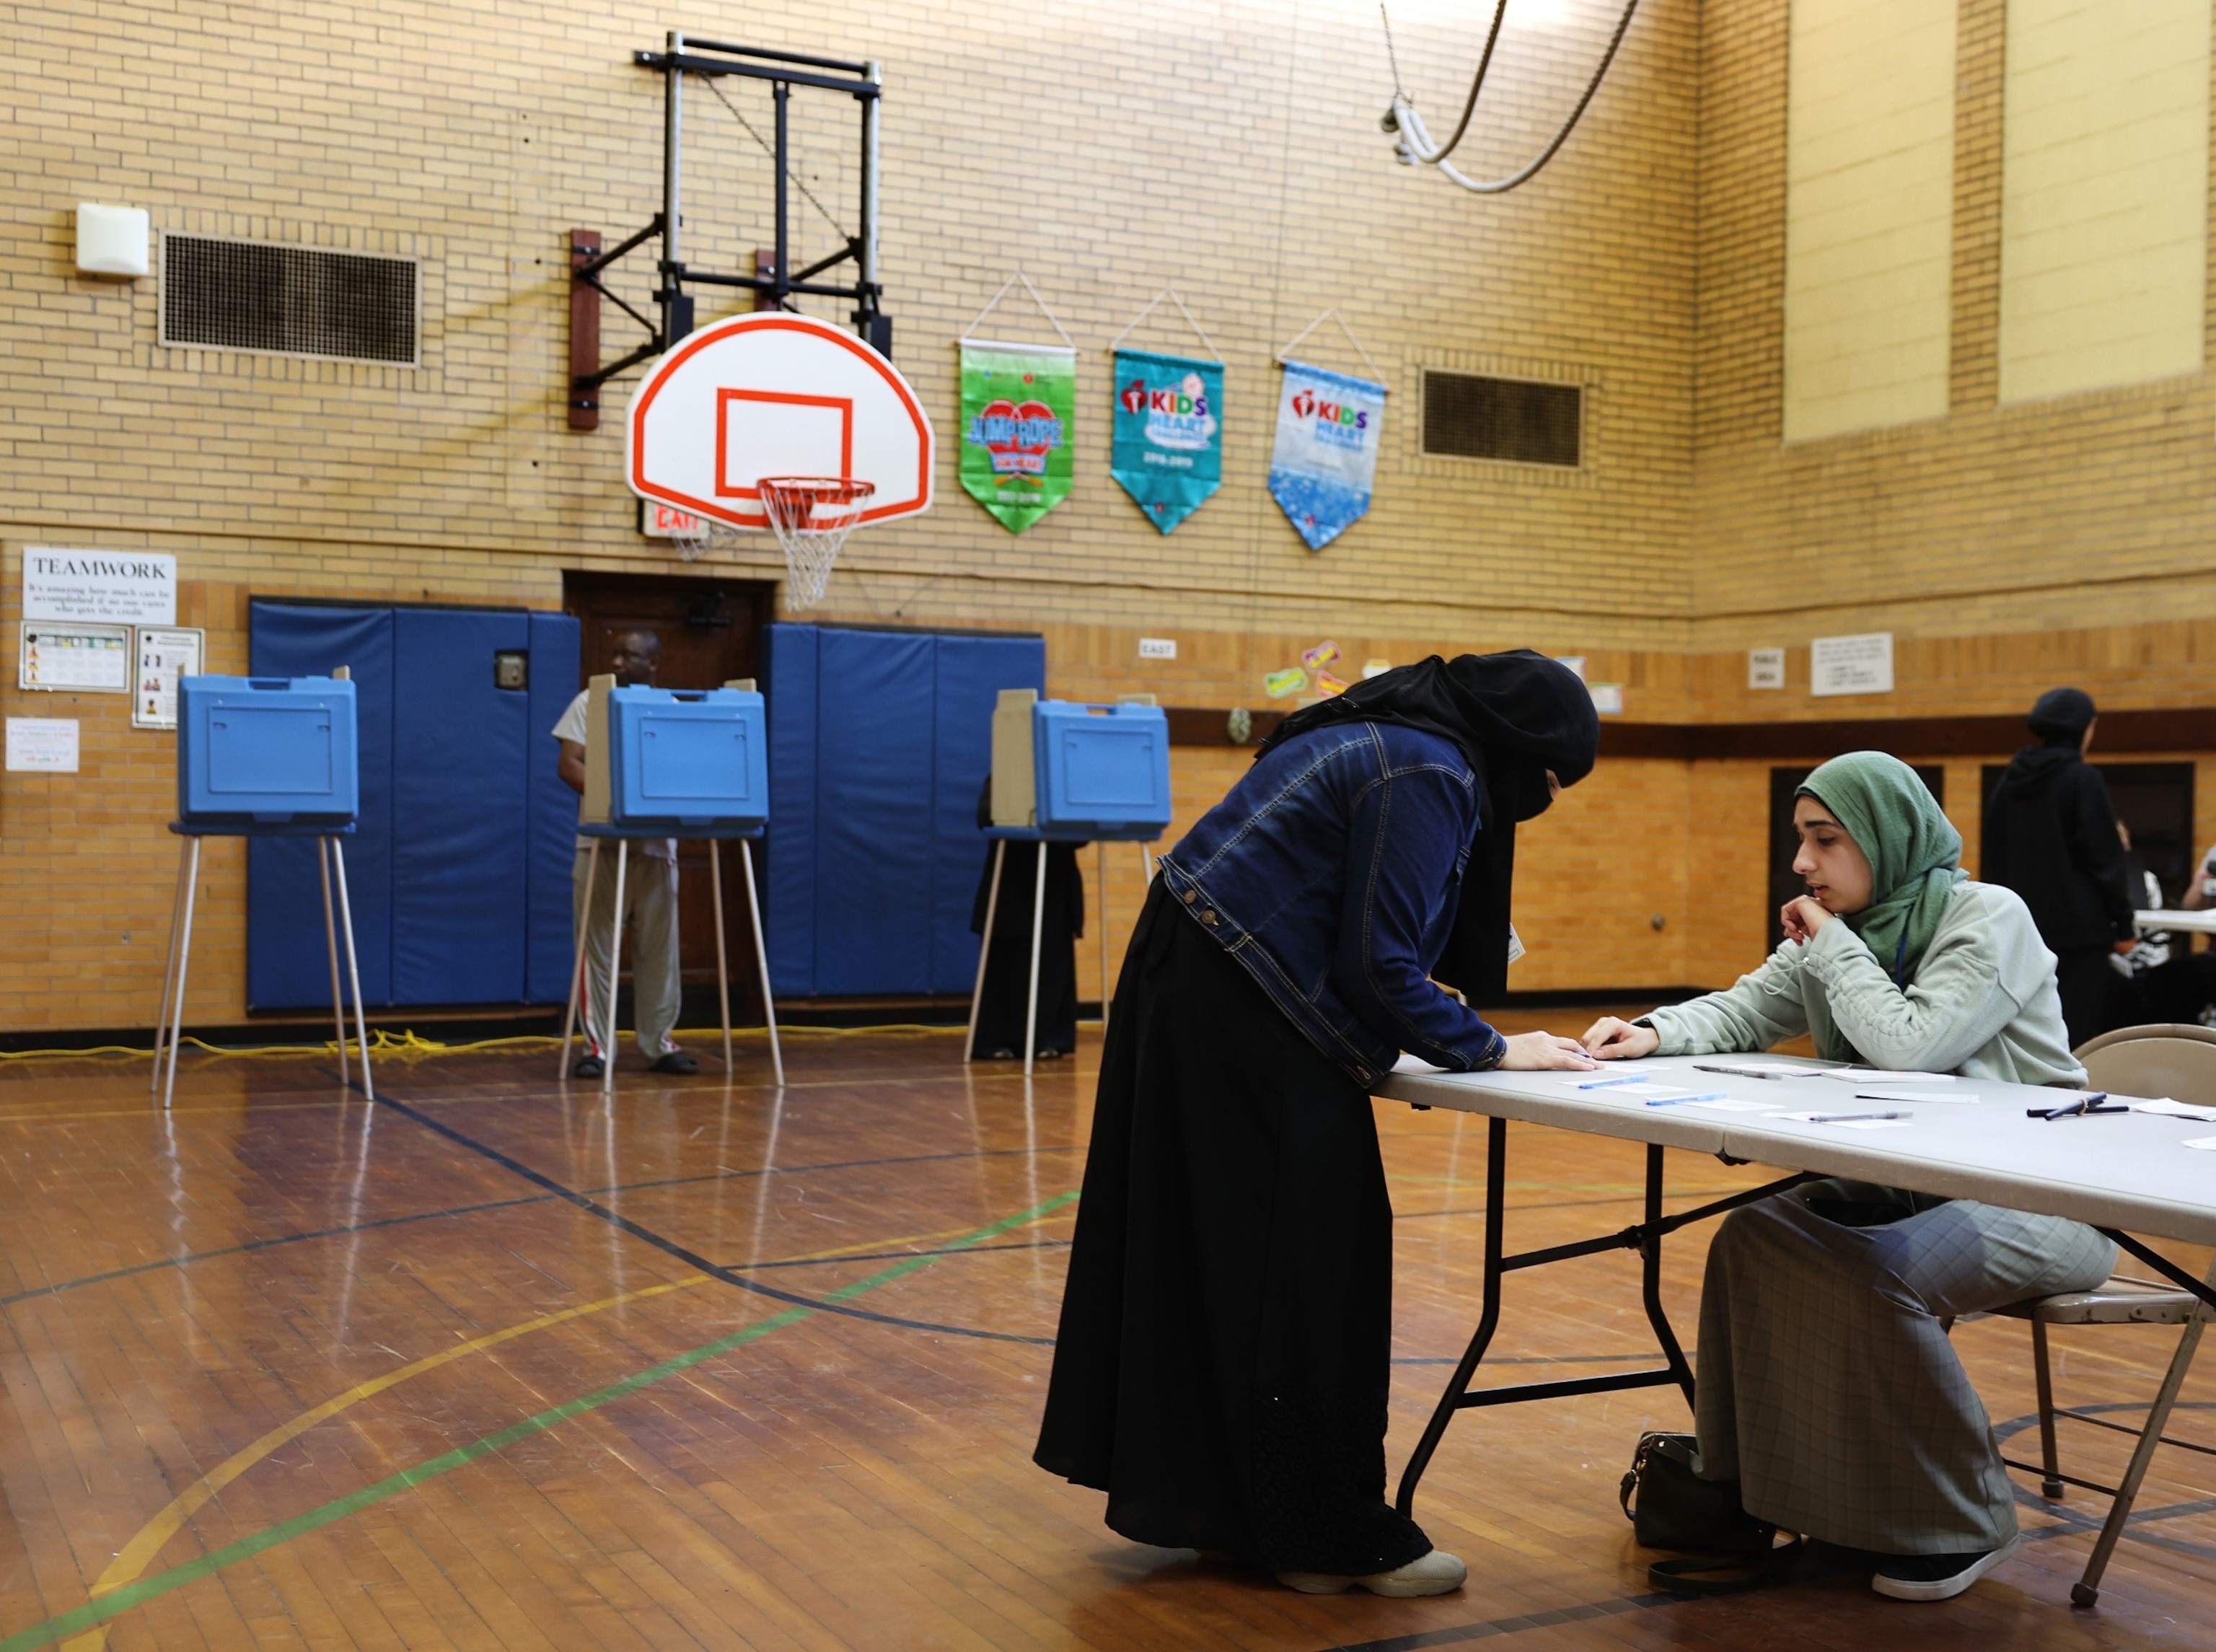 PHOTO: A voter checks-in to cast their ballot in the Michigan primary election at McDonald Elementary School, Feb. 27, 2024, in Dearborn, Mich.